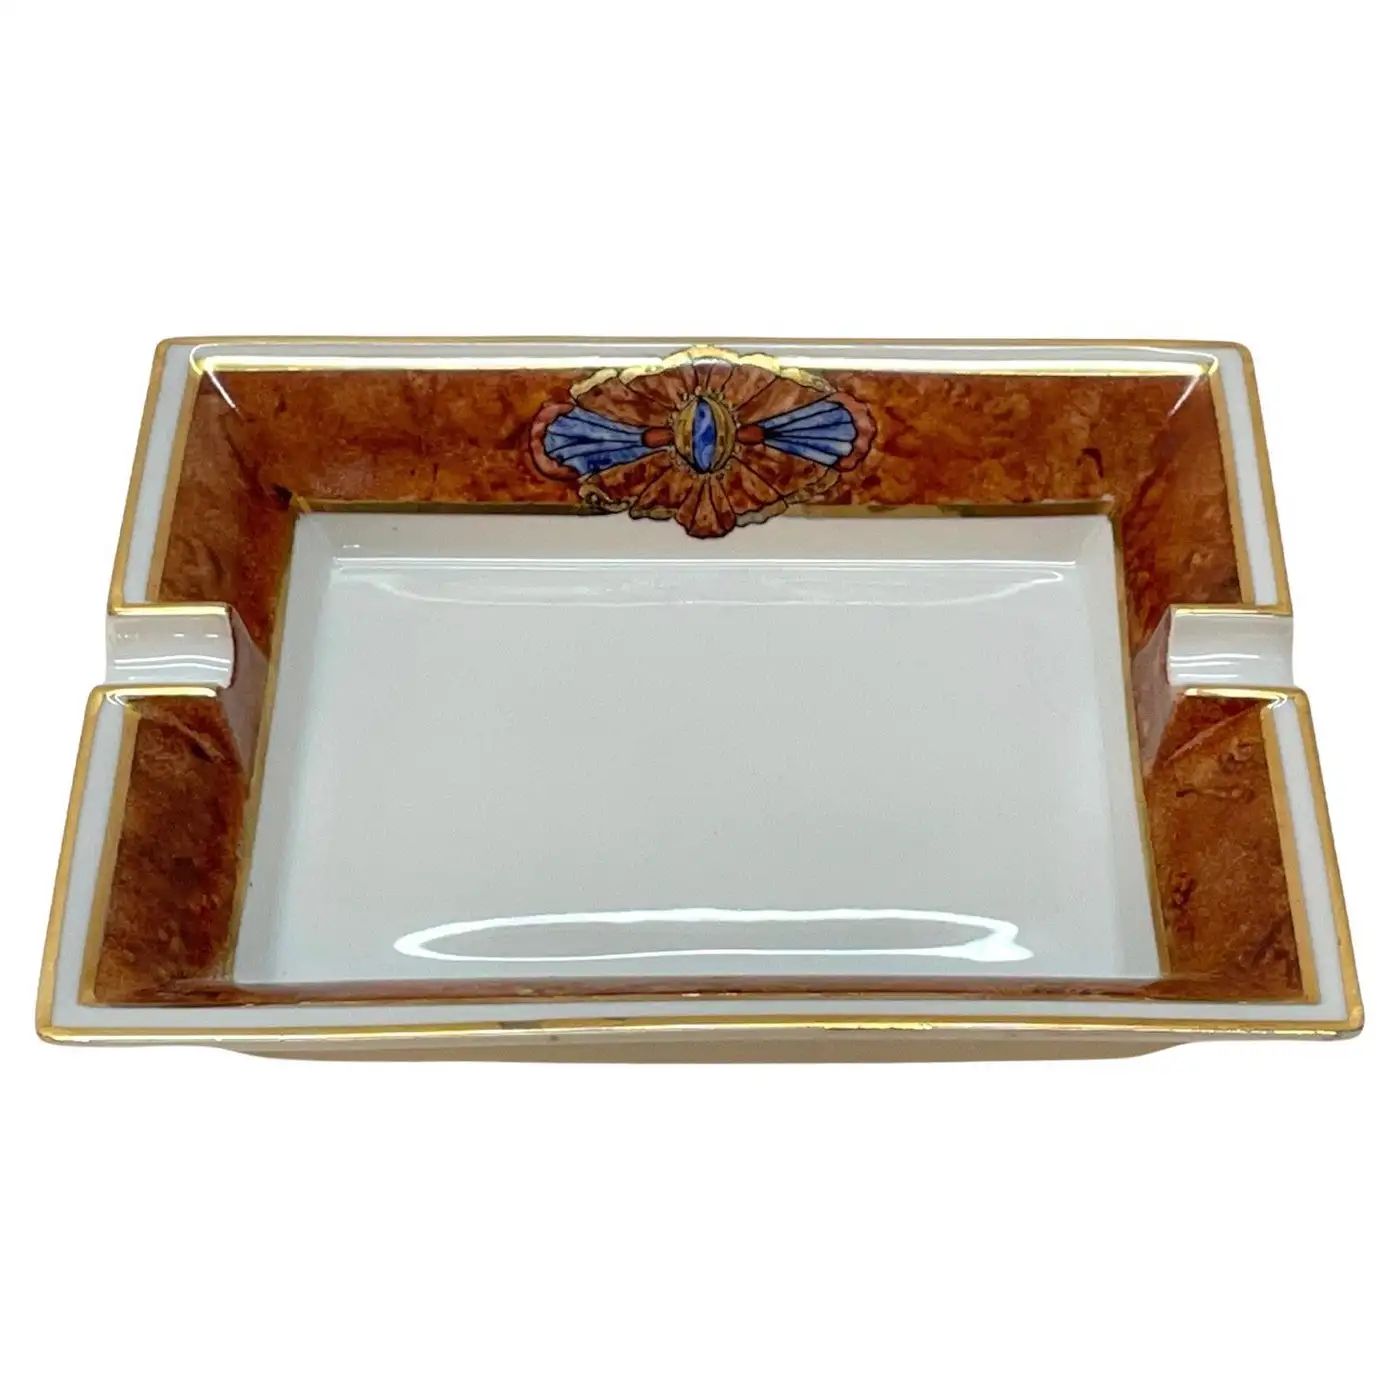 Limoges Midcentury Hand-Painted by Cevoli White Porcelain French Ashtray, 1980s | 1stDibs